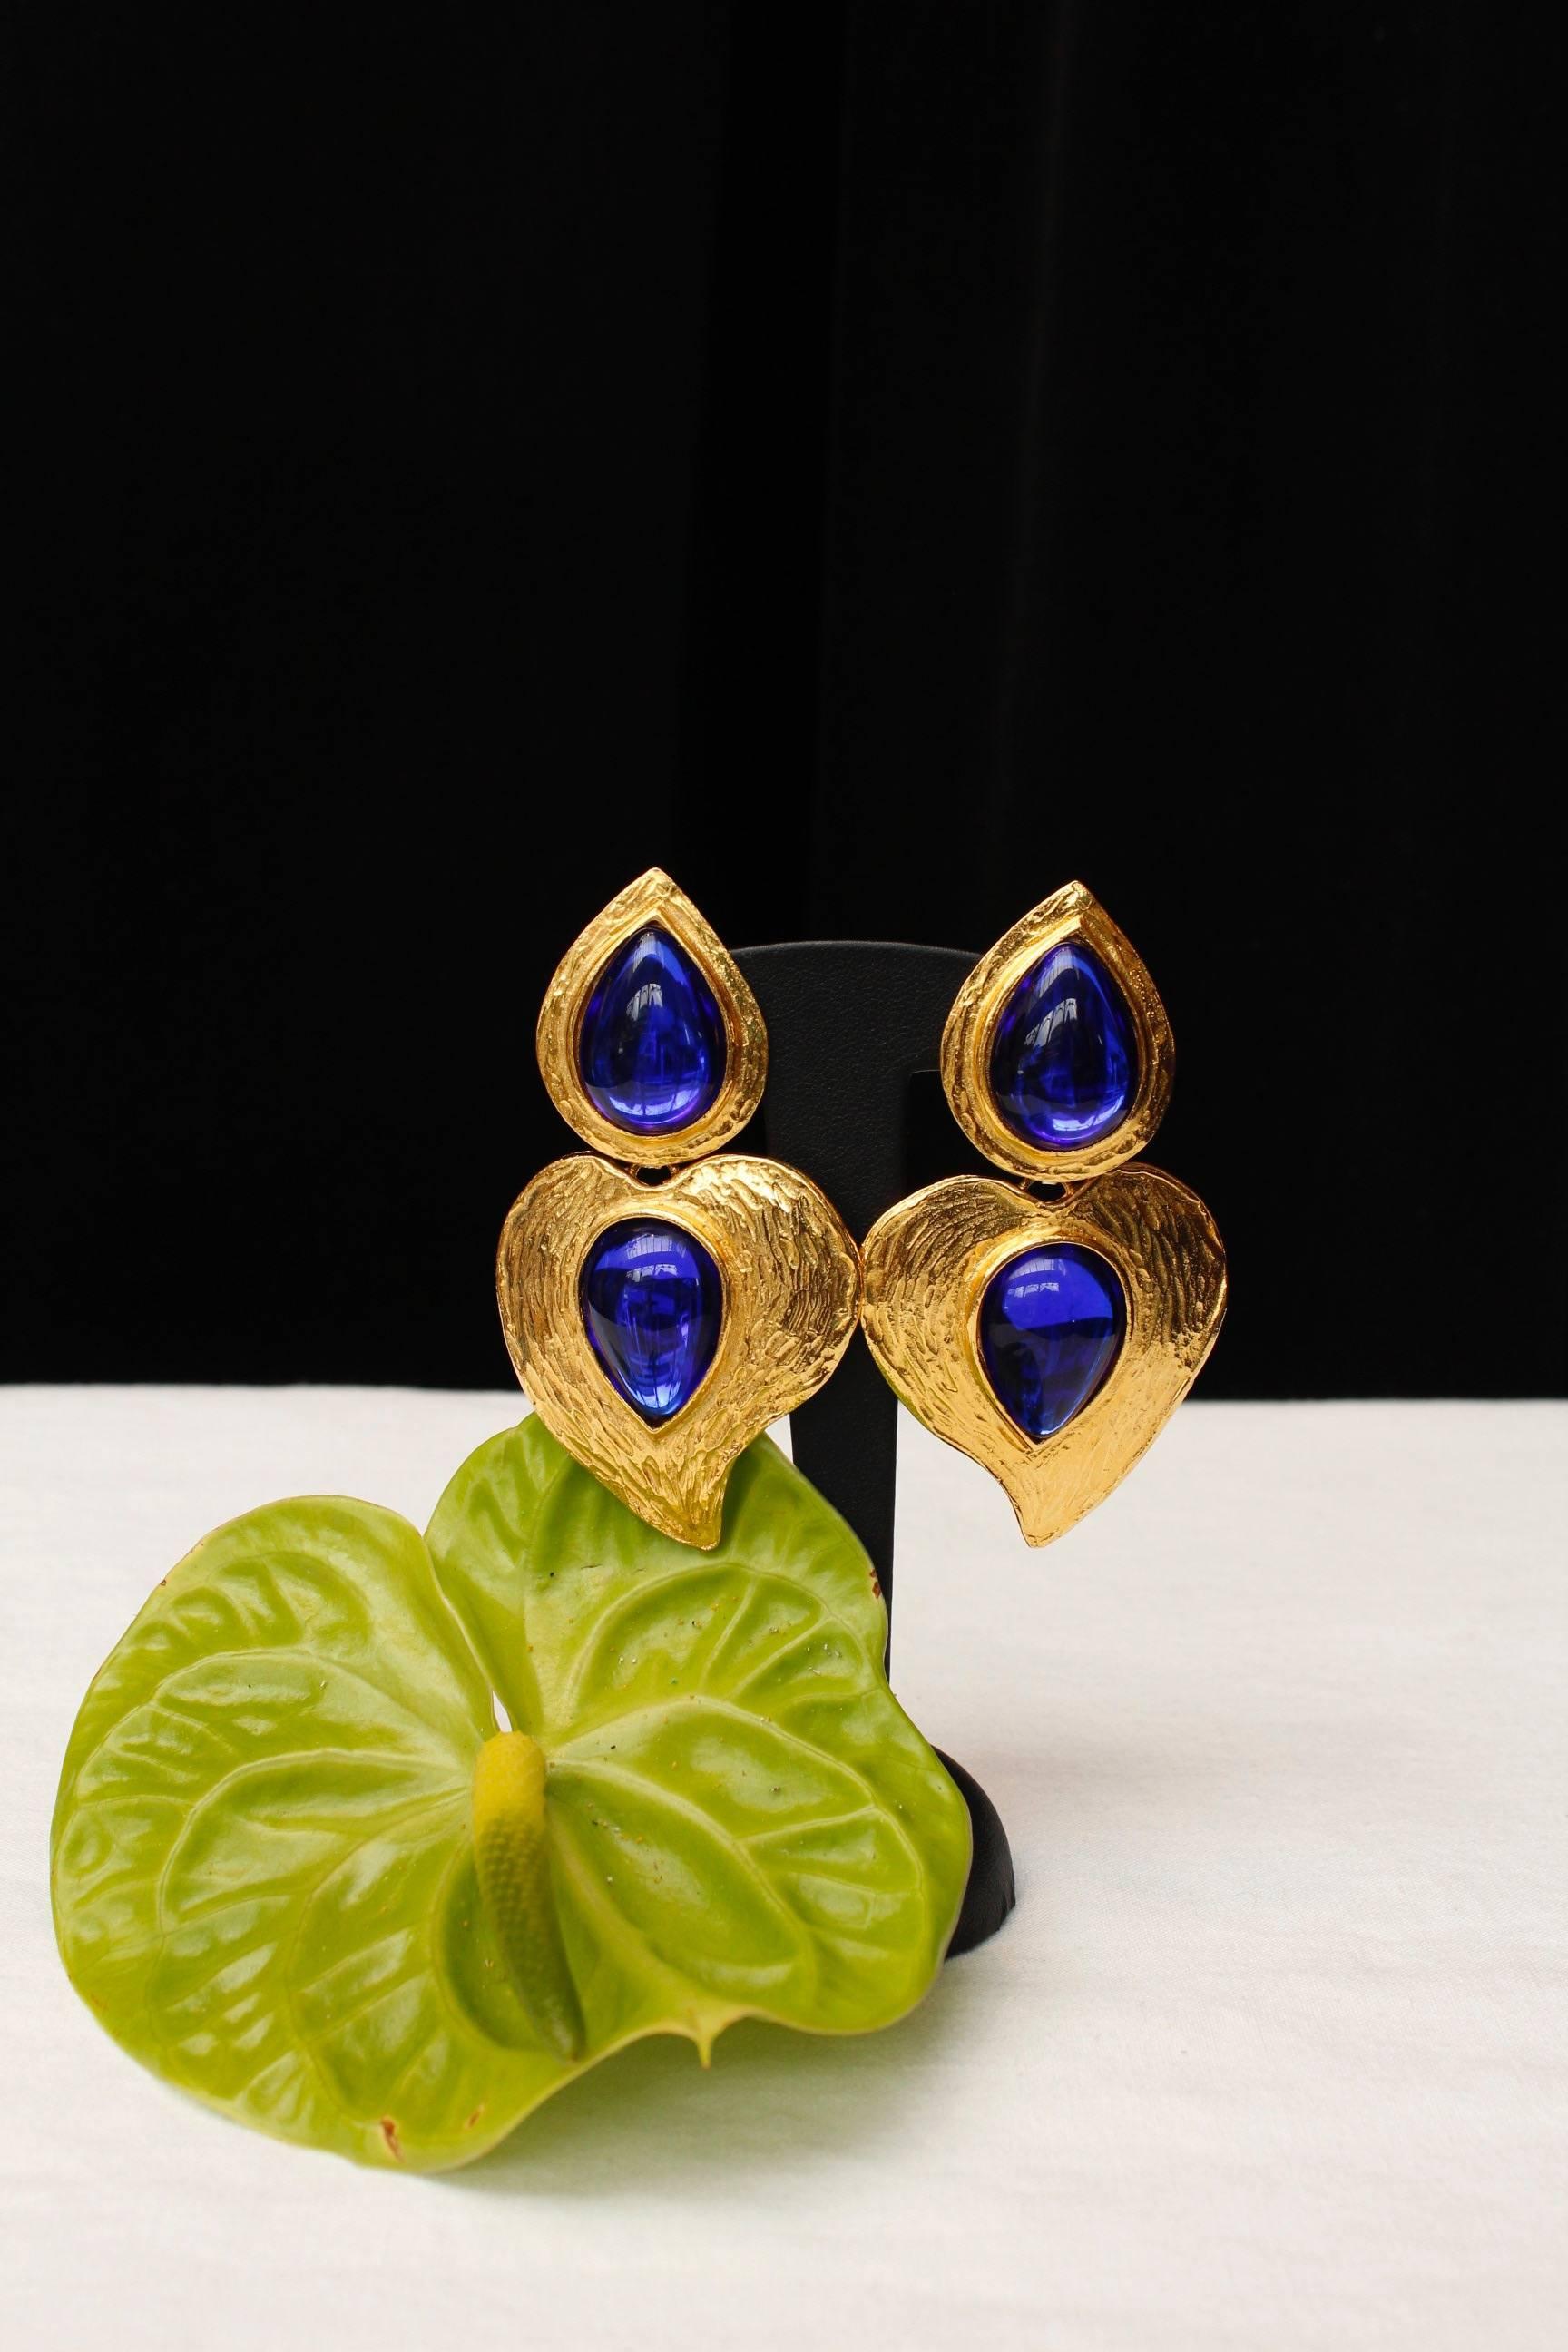 YVES SAINT LAURENT (Made in France) Drop articulated clip-on earrings in gilded metal. They are composed of a tear-drop and a stylized heart, each of them paved with a blue resin cabochon. Signed at back.

Circa 1980-1990.

Total length 8 cm (3.25